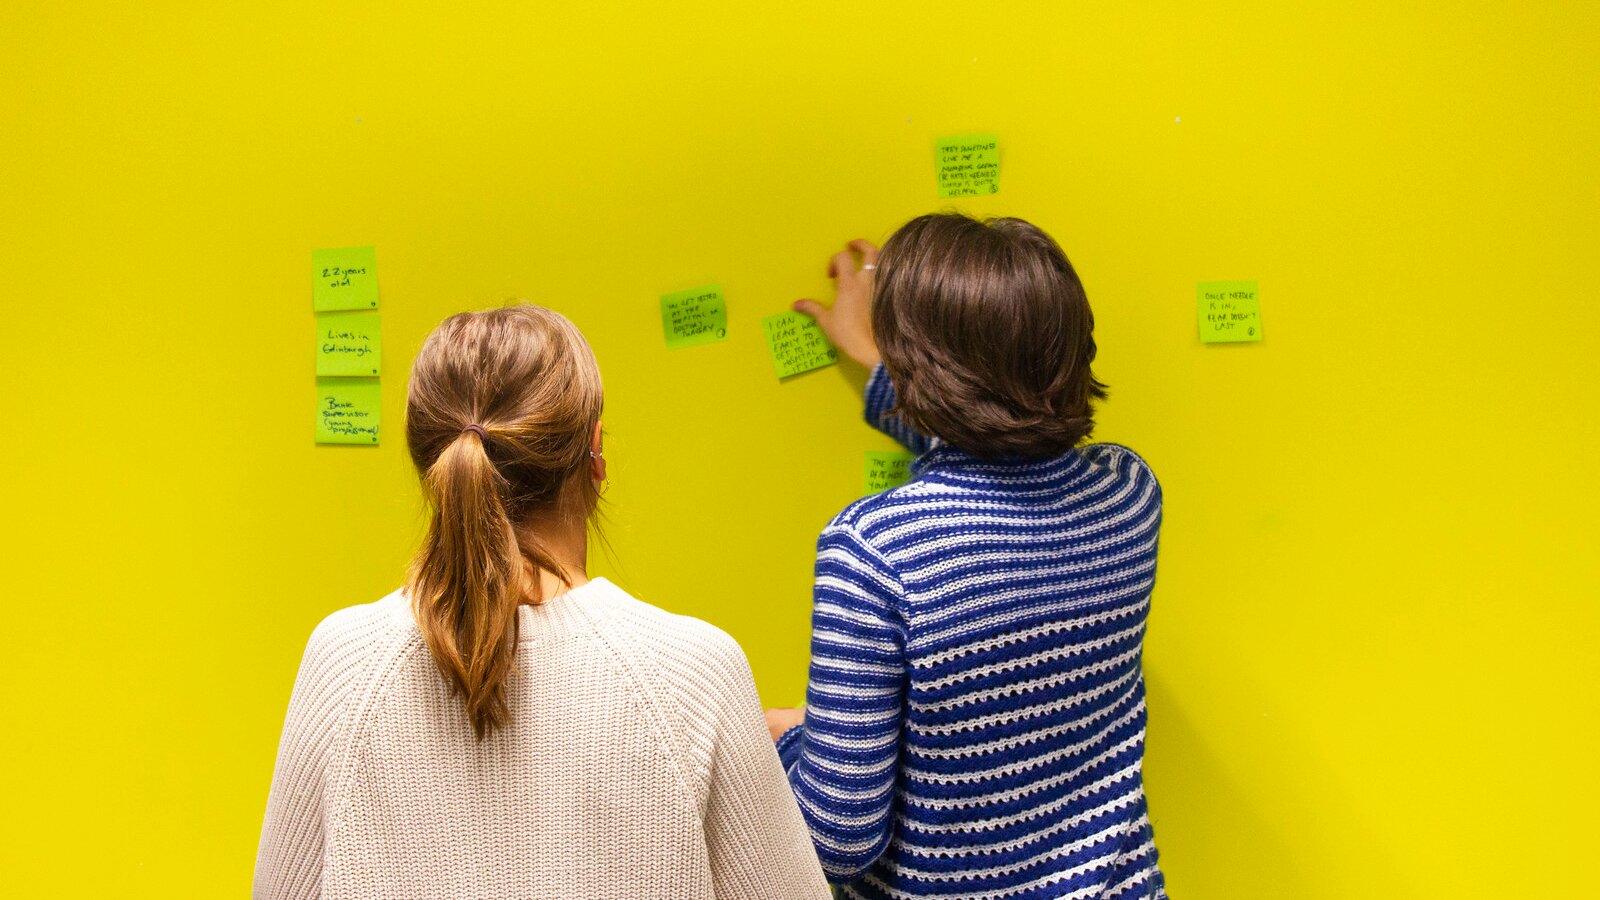 Photograph of two people sticking green post its with writing onto a bright yellow wall. The people appear to be in discussion. 